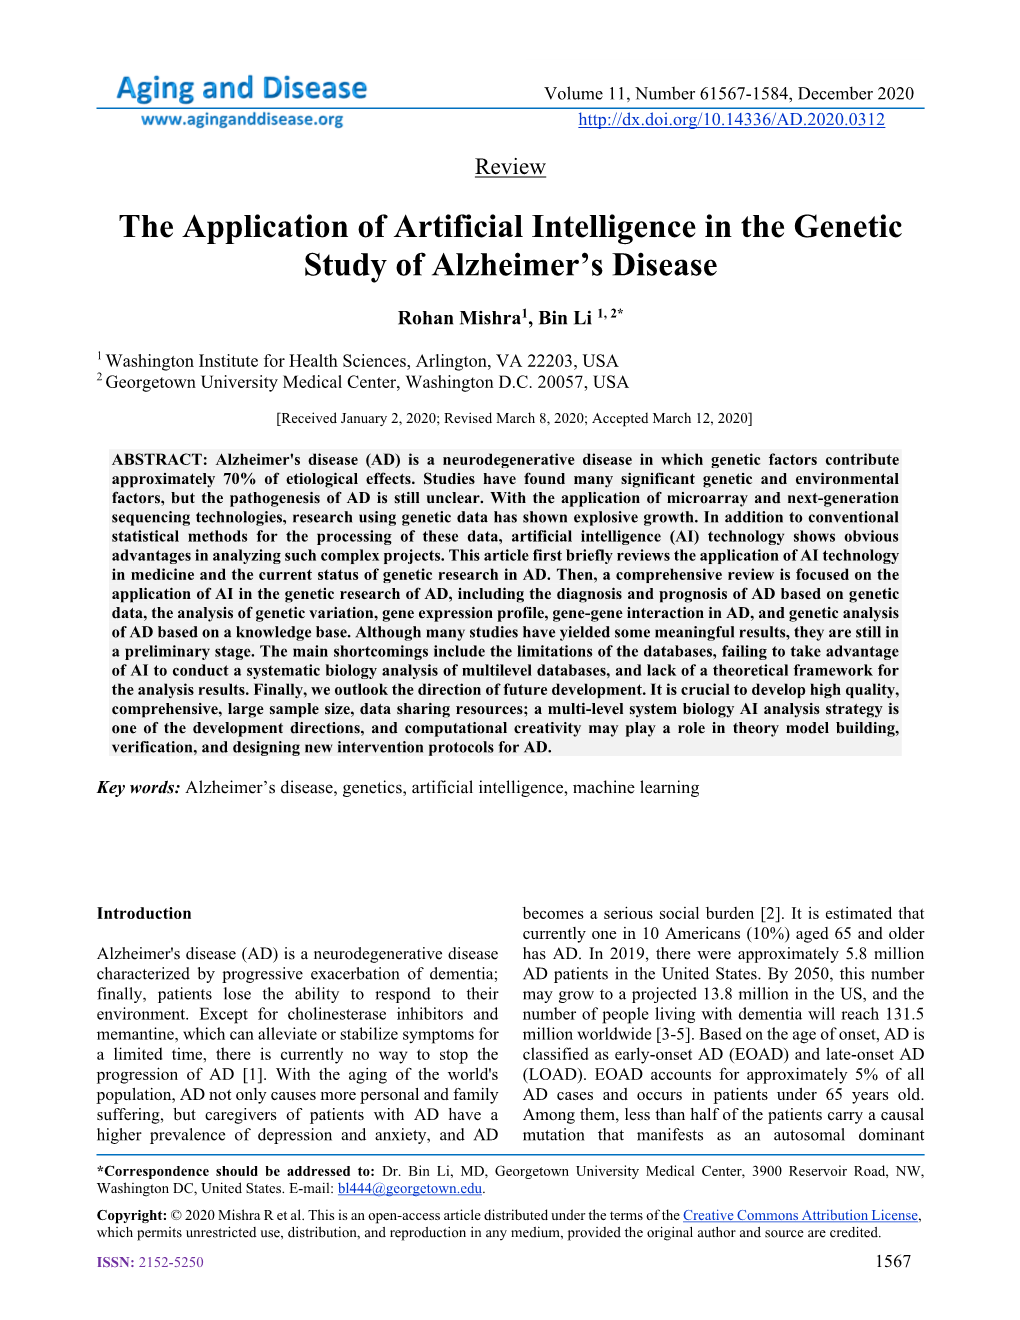 The Application of Artificial Intelligence in the Genetic Study of Alzheimer’S Disease